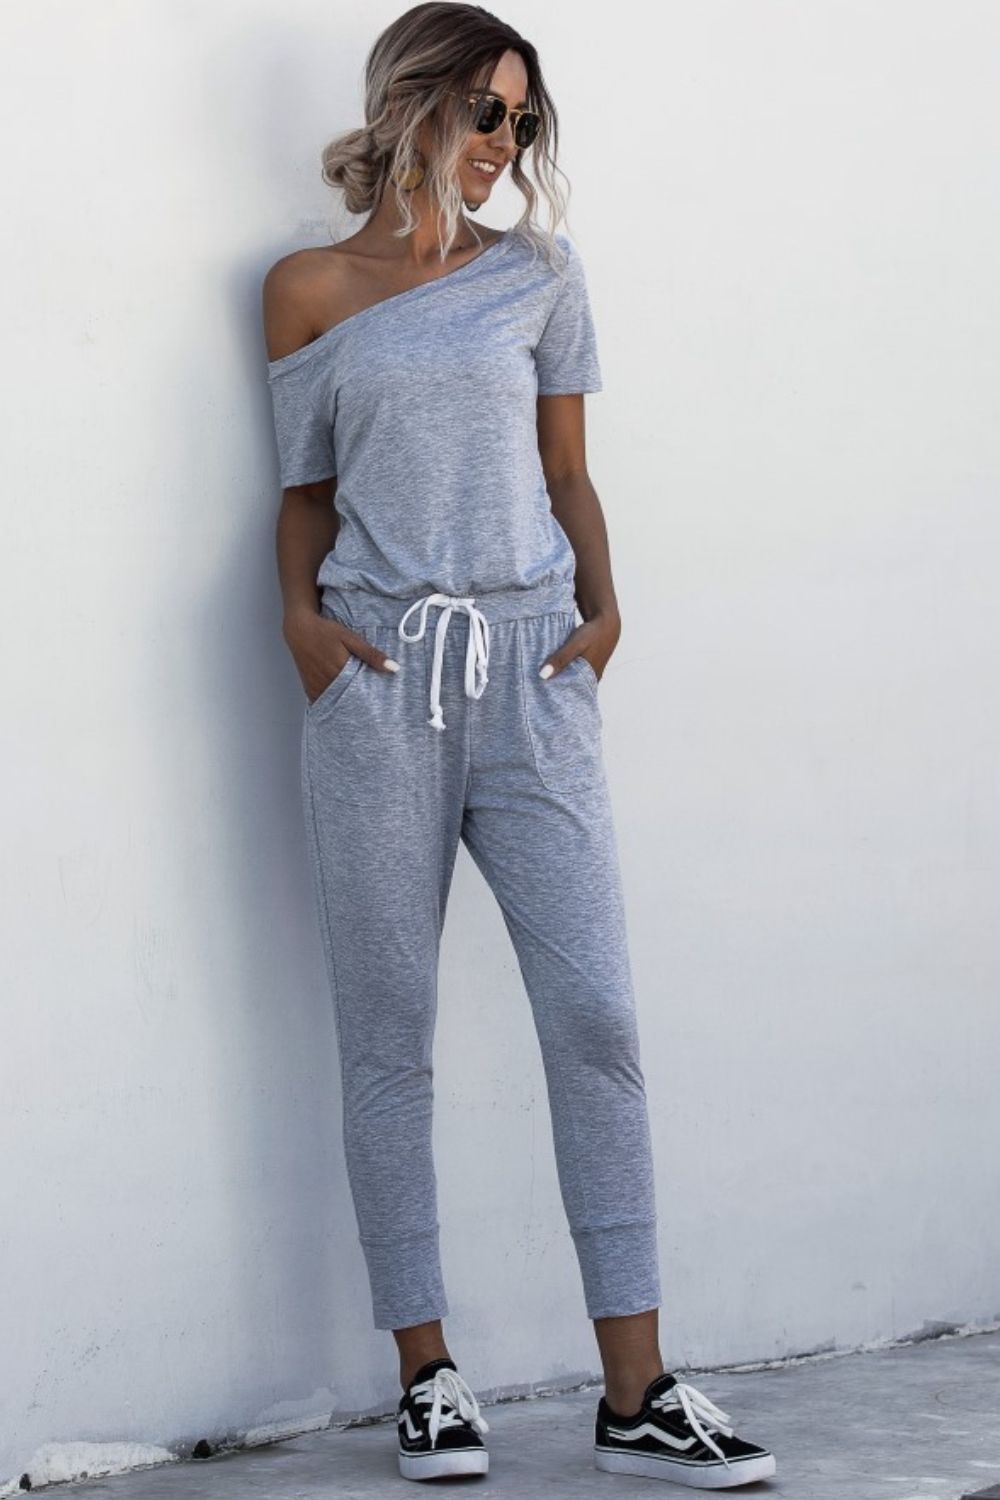 Load image into Gallery viewer, Asymmetrical Neck Tied Jumpsuit with Pockets
